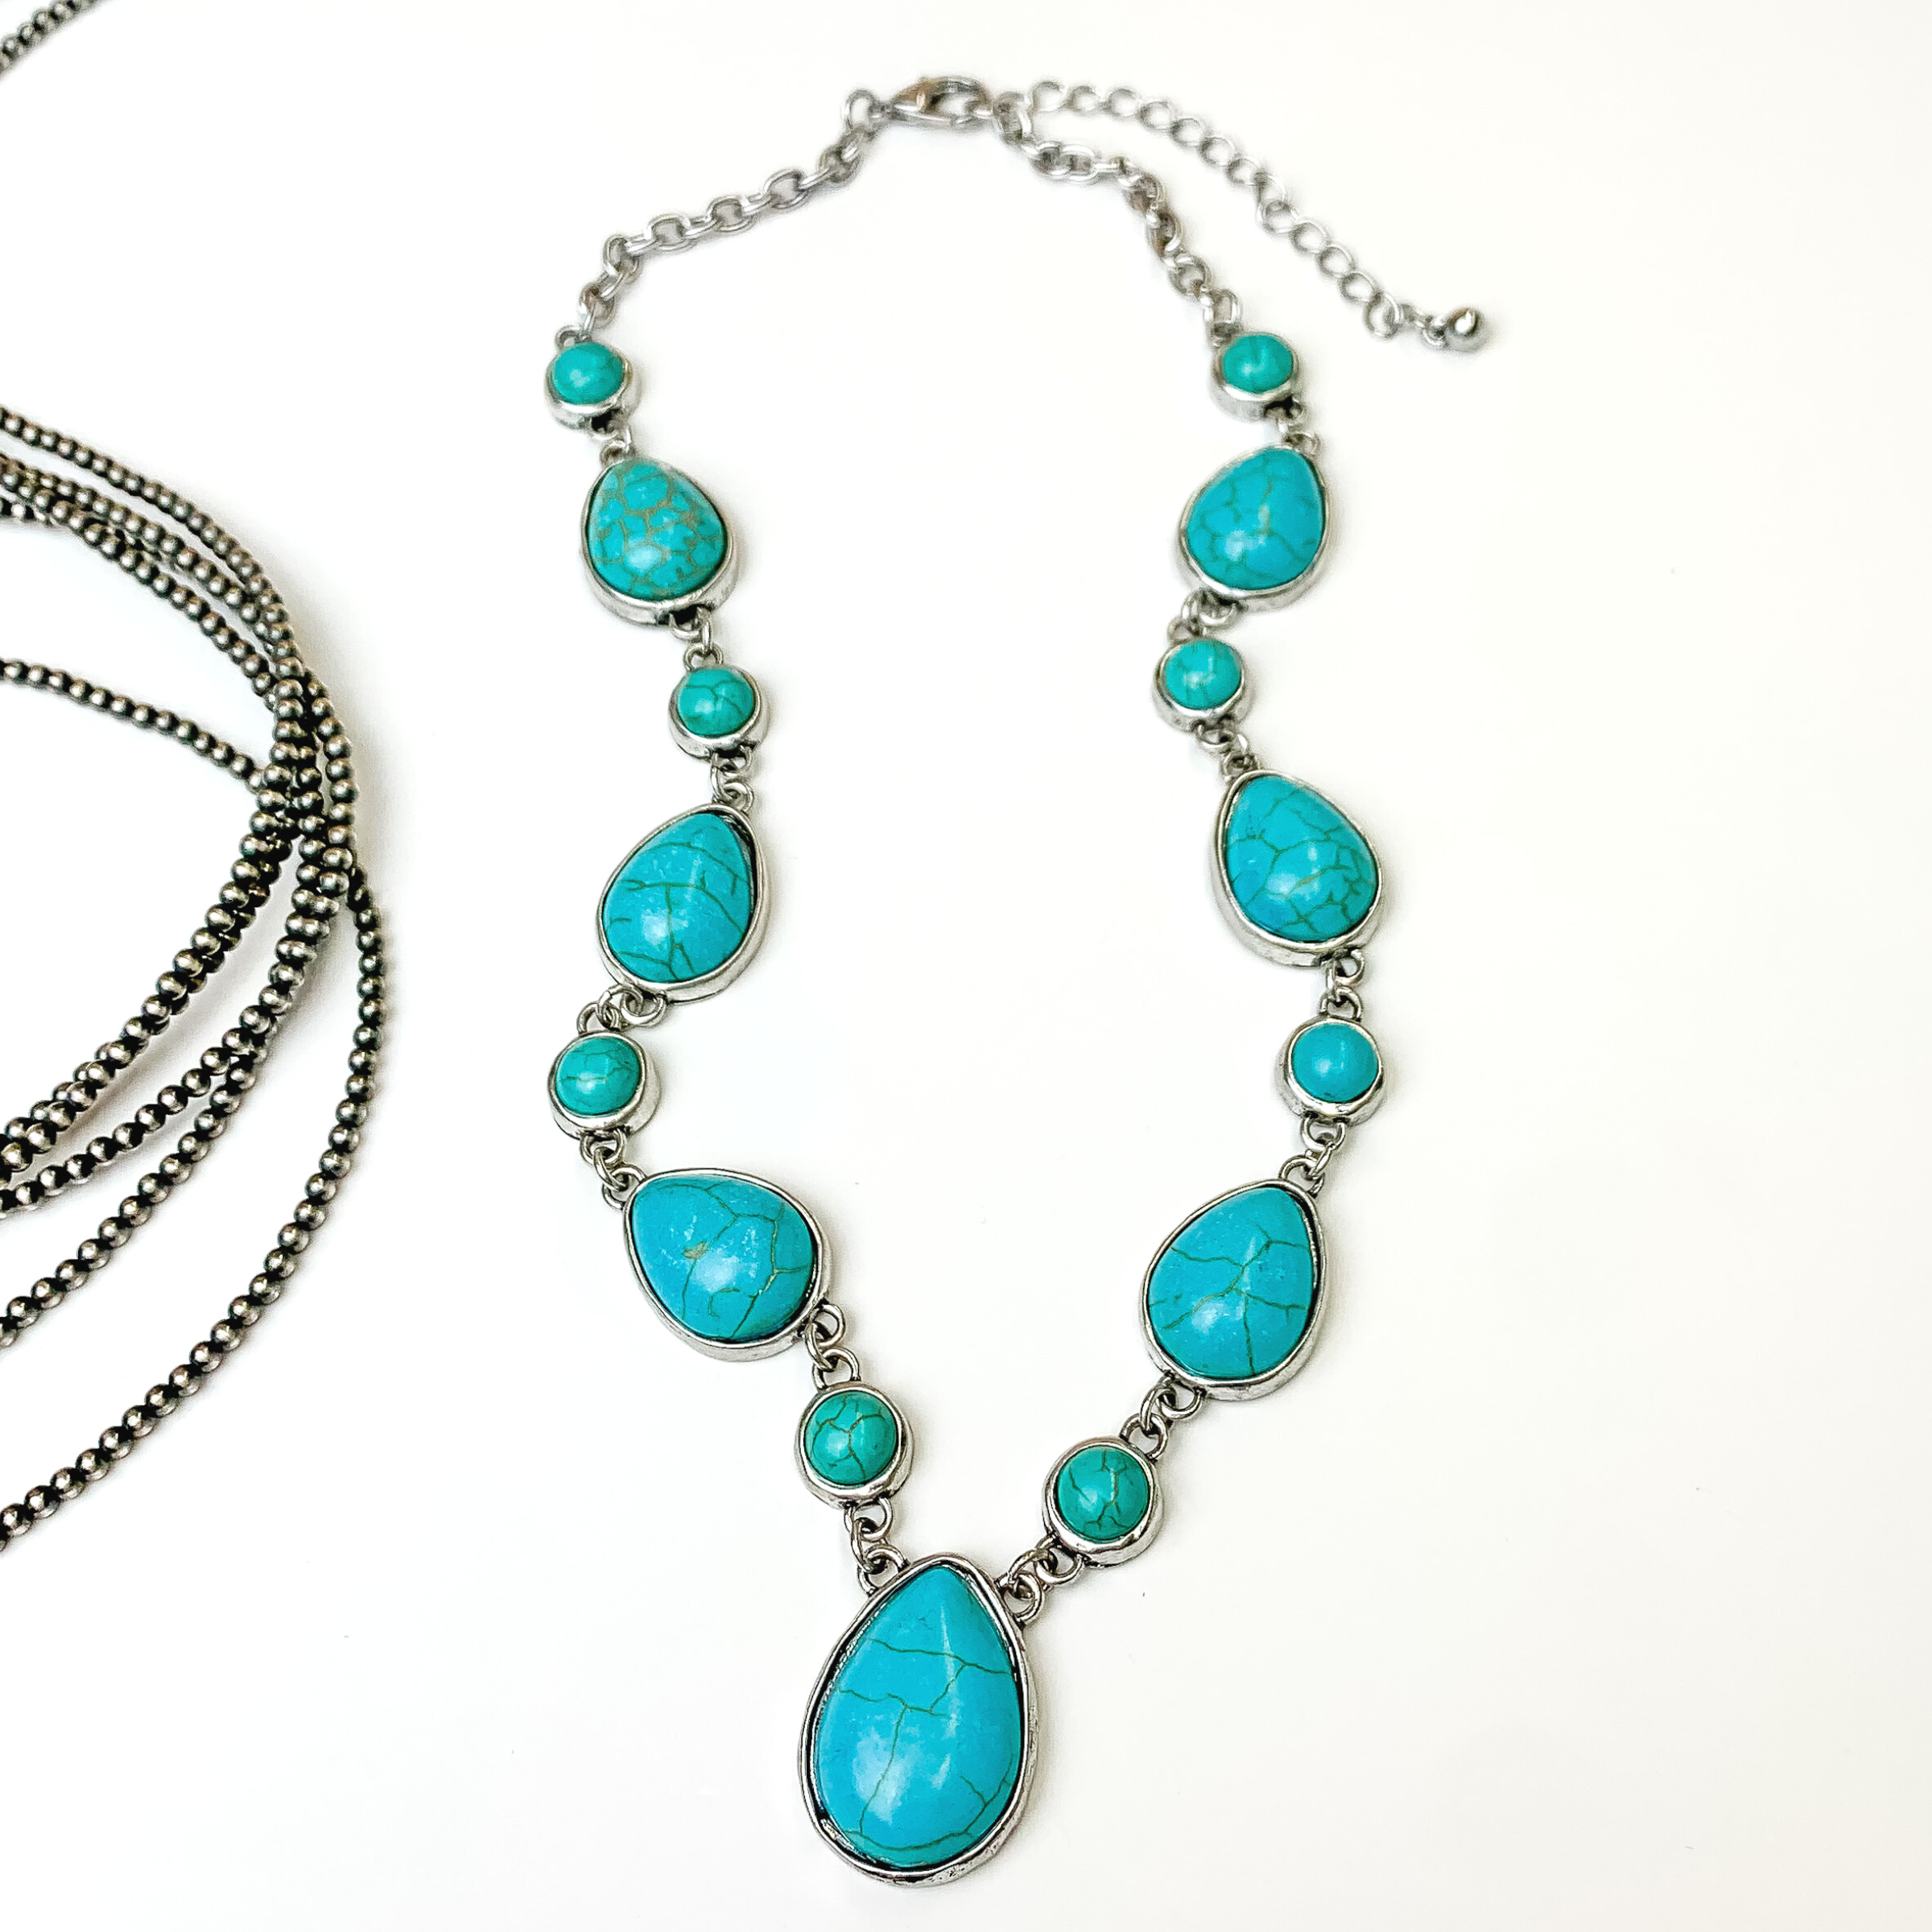 Small Town Crush Faux Navajo Necklace with Circle and Teardrop Turquoise Stones - Giddy Up Glamour Boutique